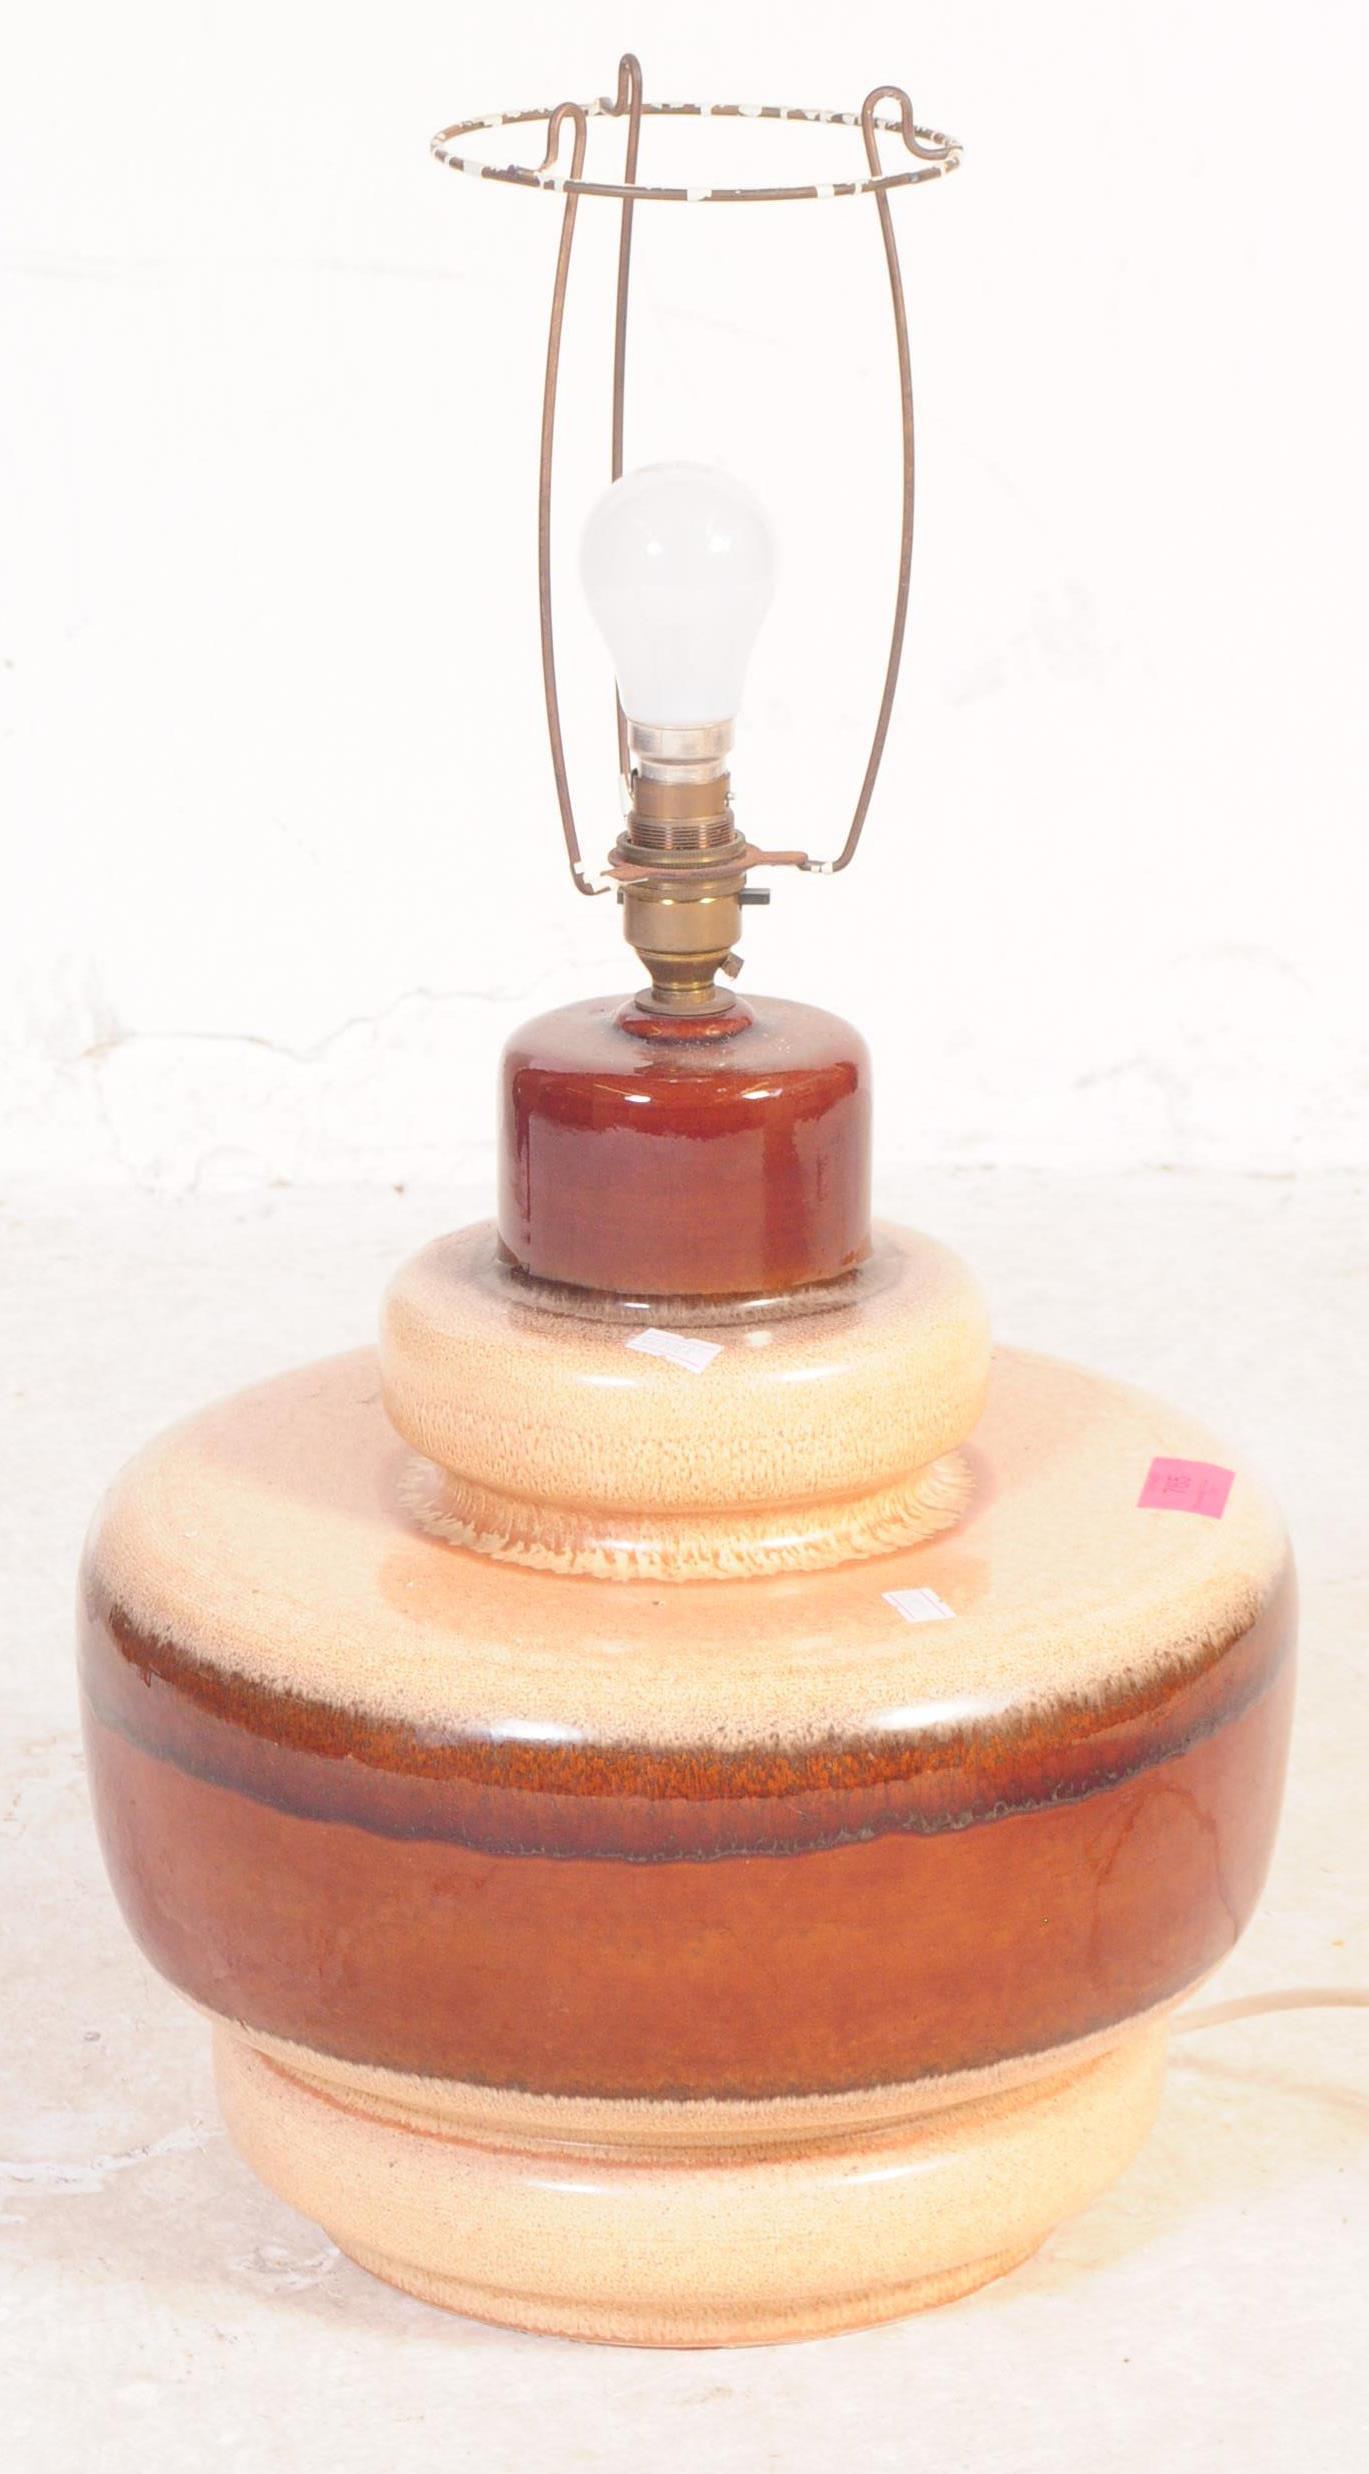 VINTAGE MID 20TH CENTURY WEST GERMAN POTTERY TABLE LAMP - Image 2 of 5